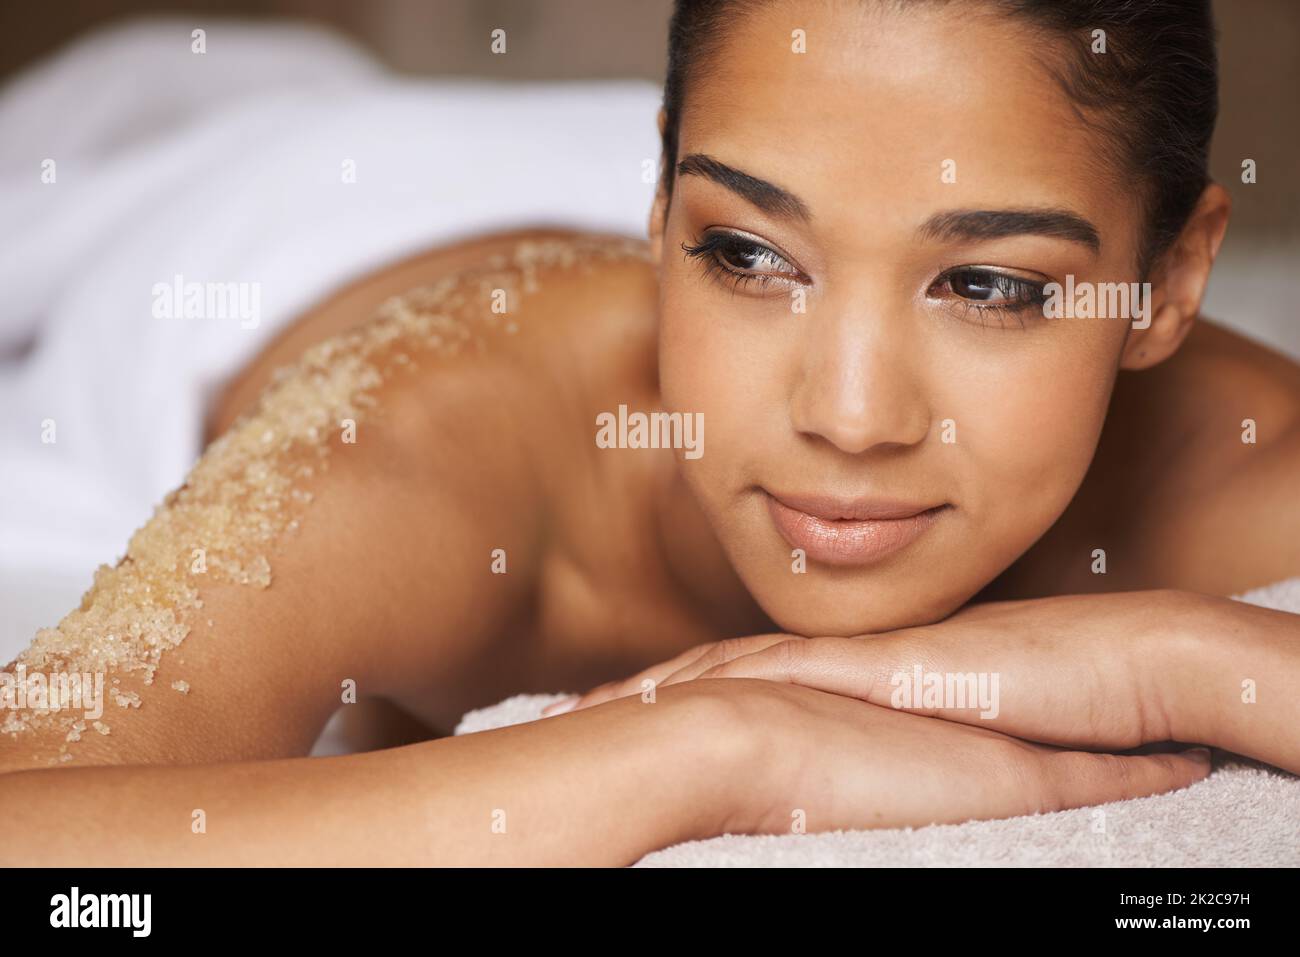 Total body exfoliation. Closeup shot of a young woman relaxing during a spa treatment. Stock Photo